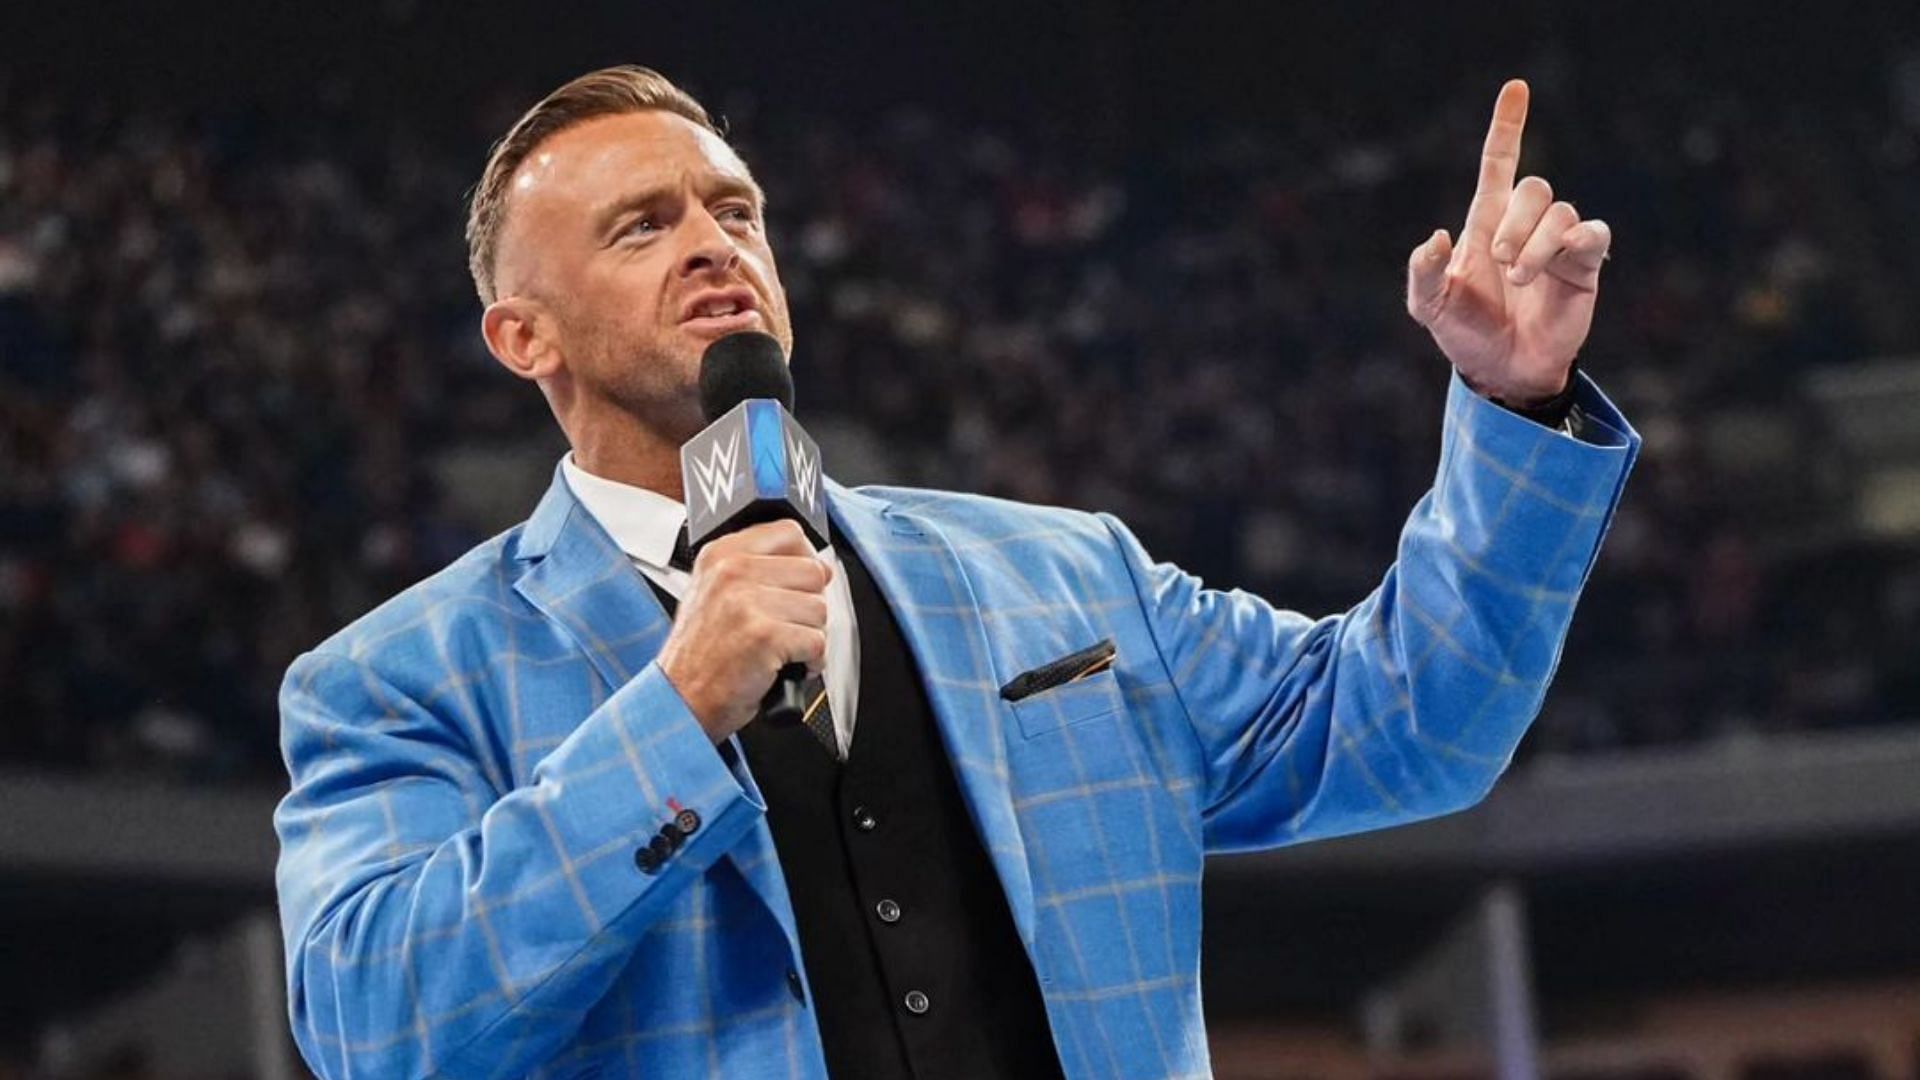 Nick Aldis will be welcoming some NXT superstars to SmackDown